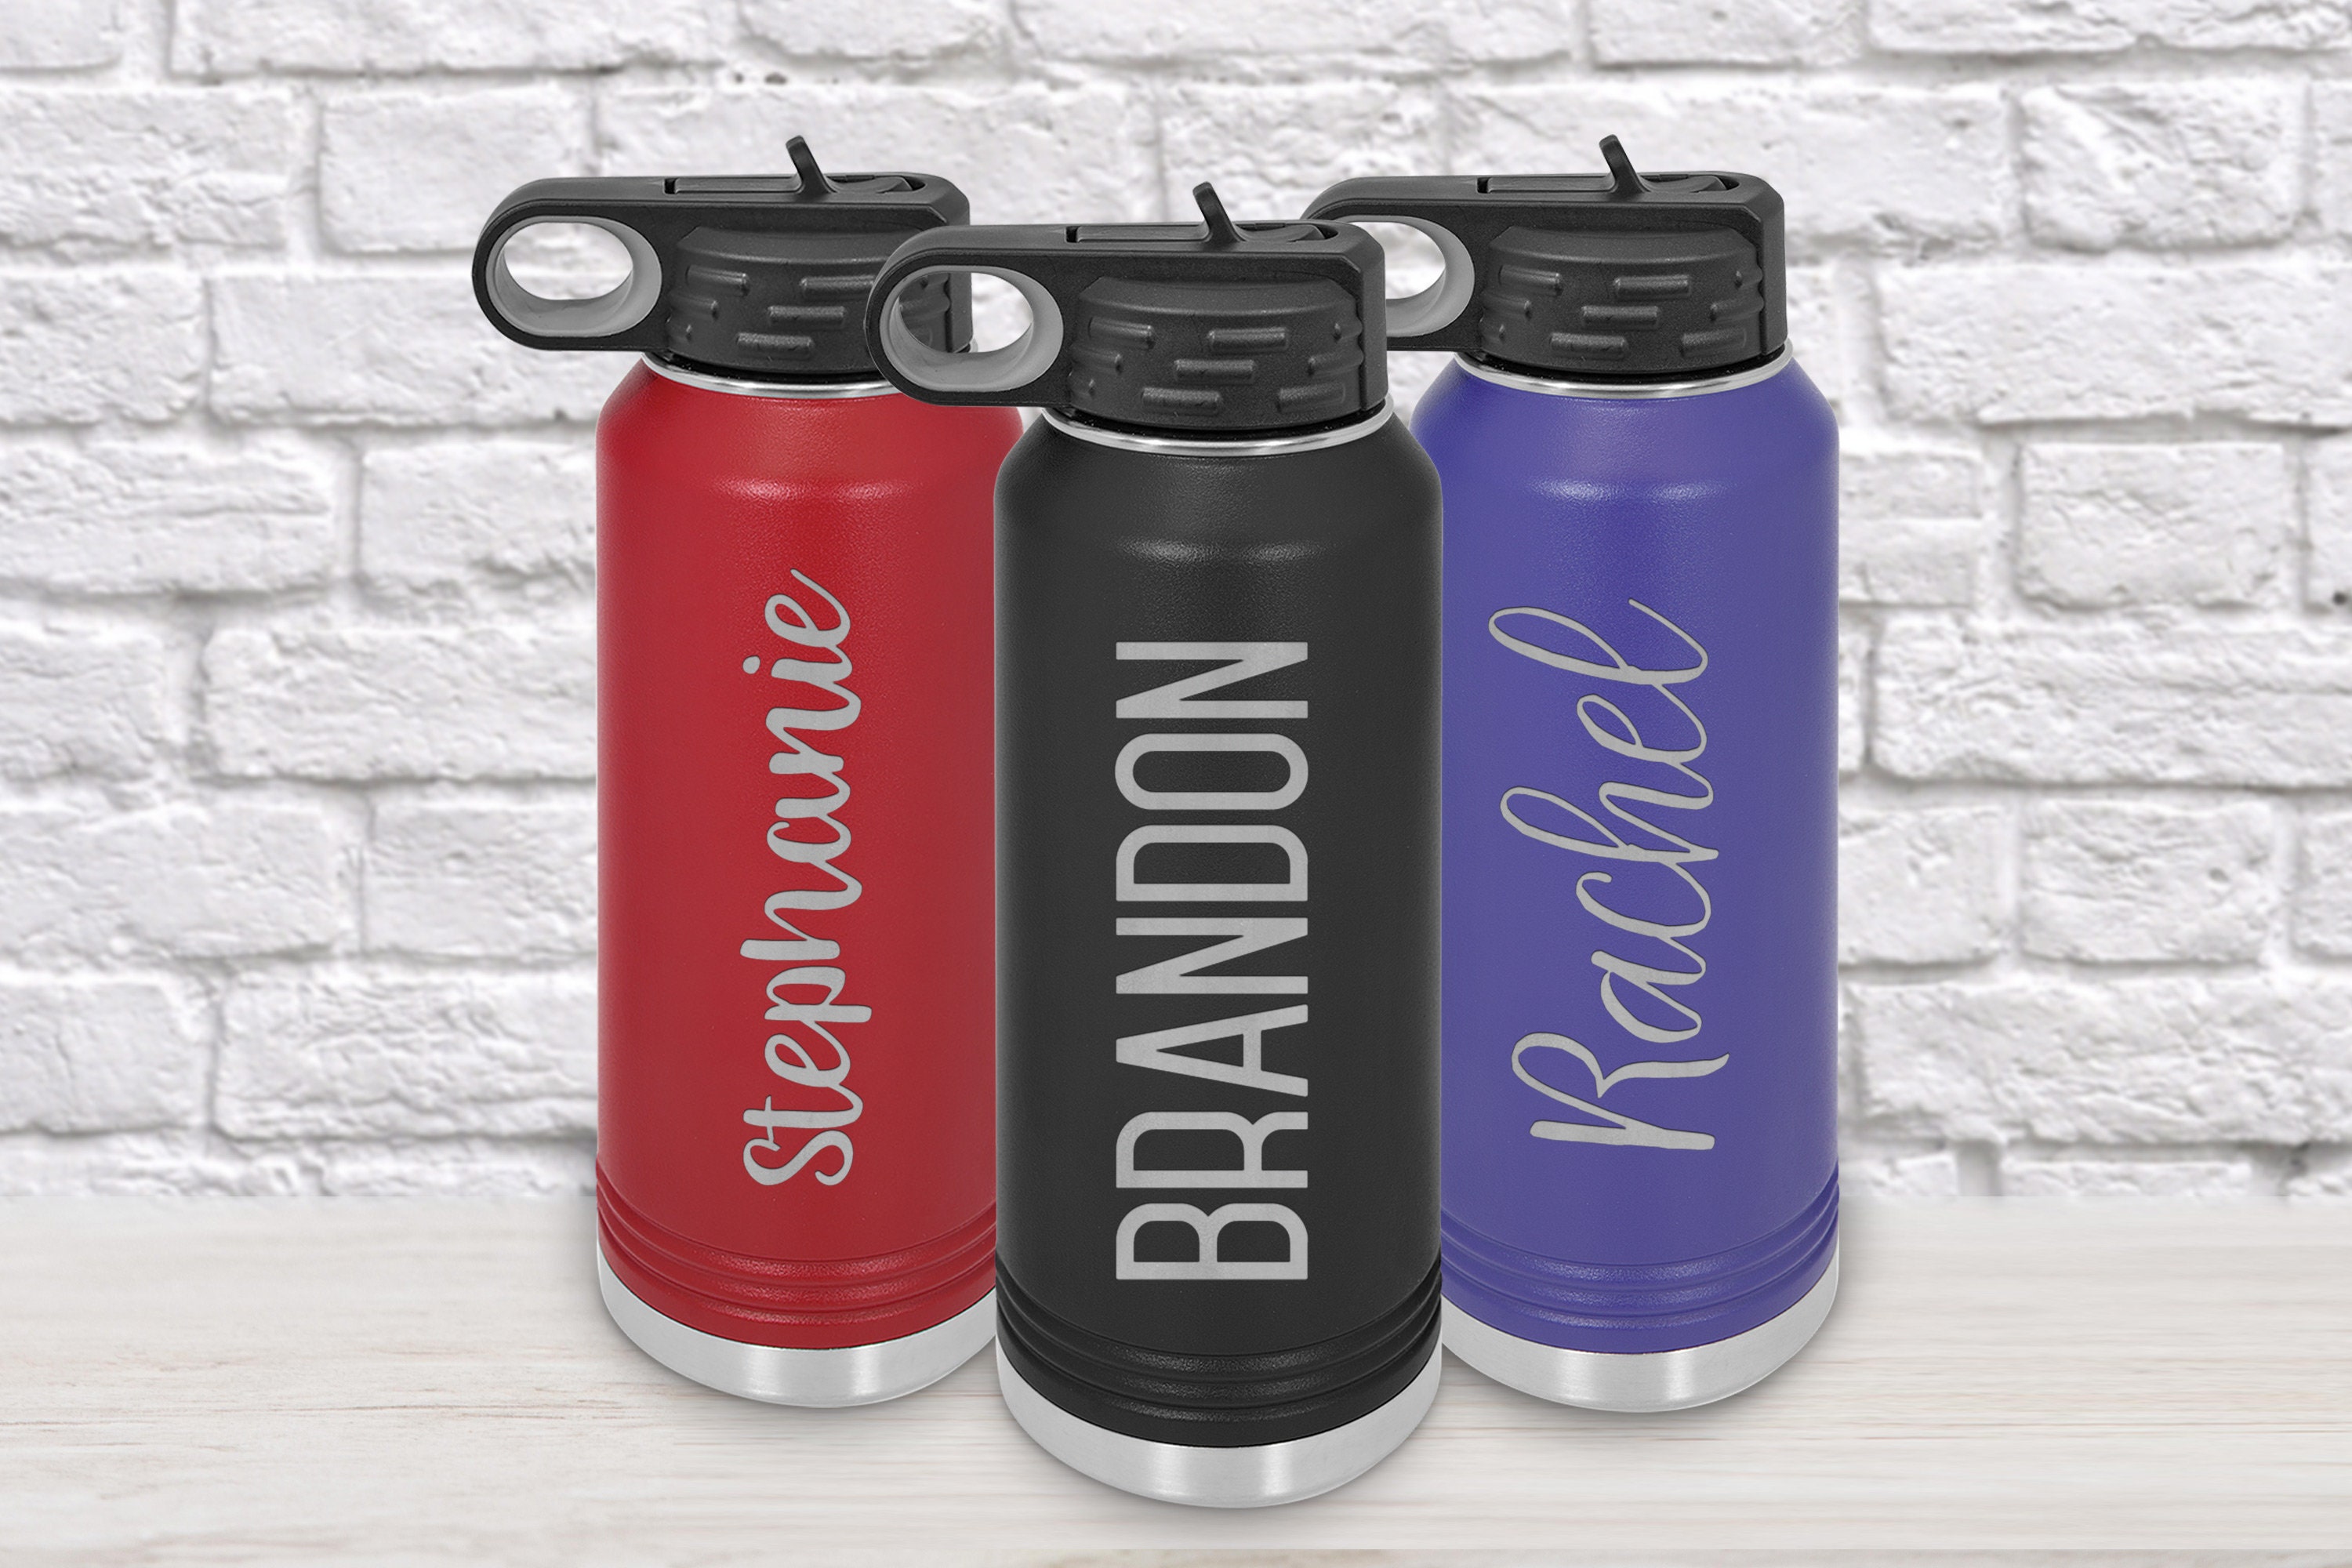 32oz Personalized Water Bottle Owala Freesip Insulated Stainless